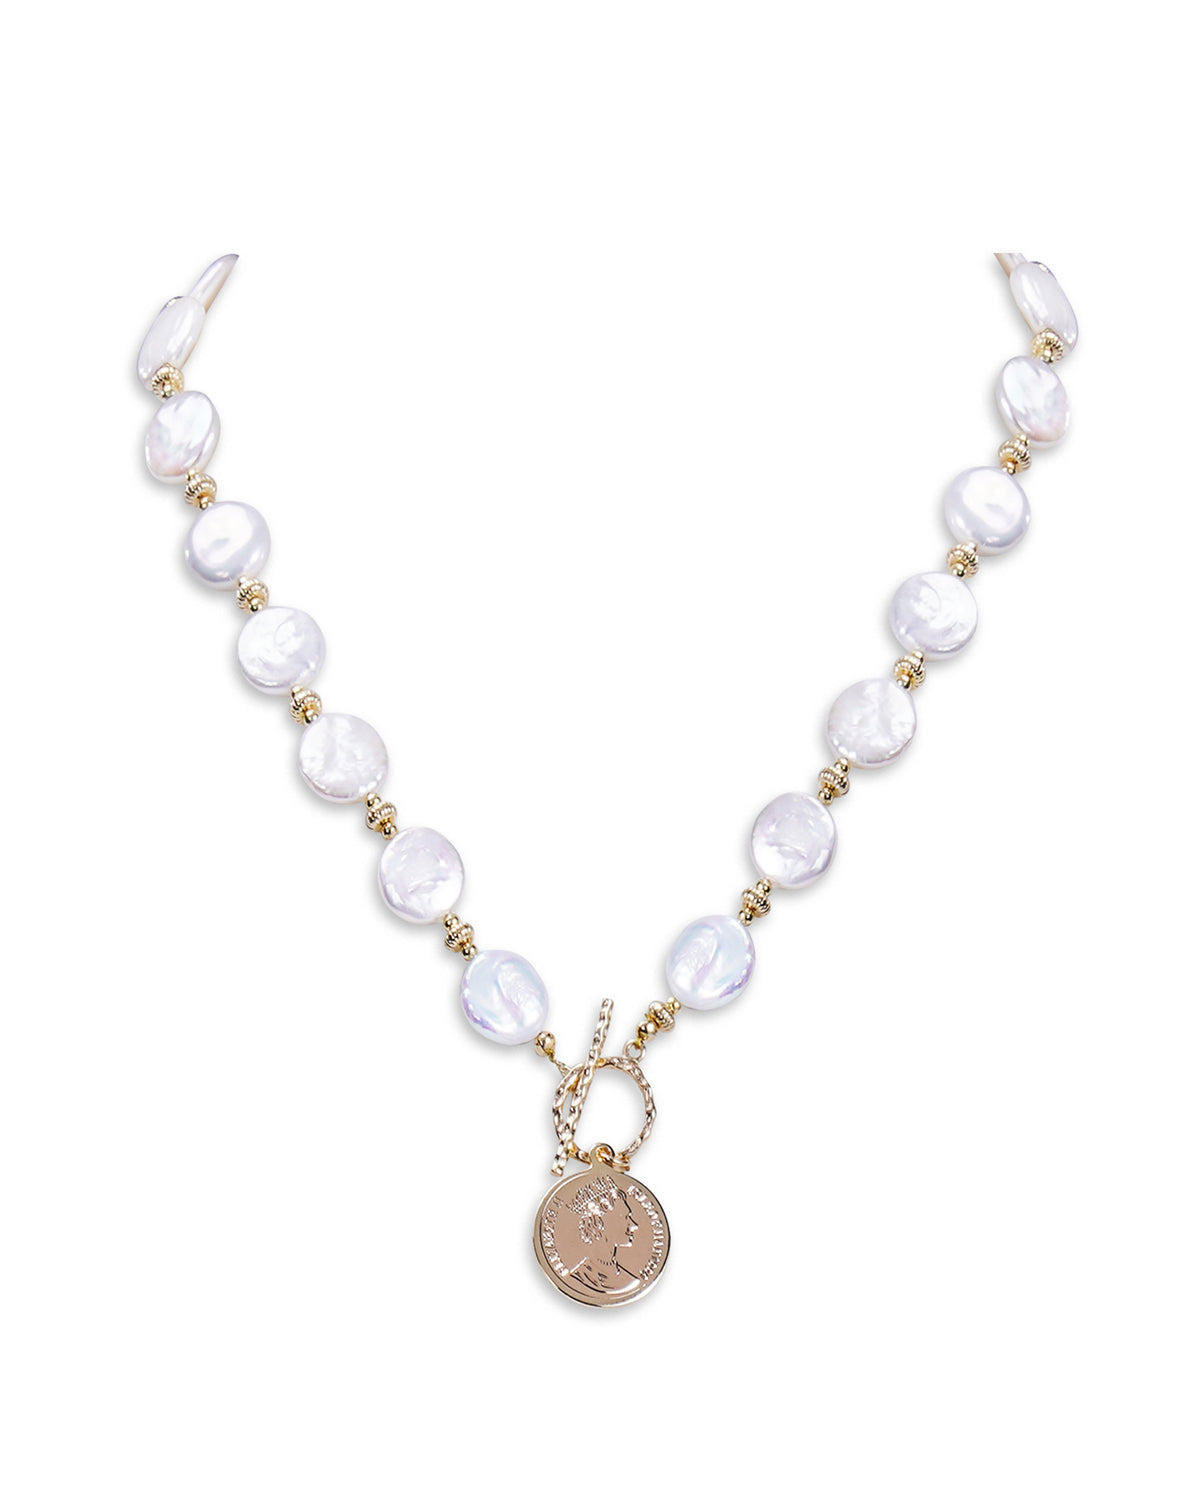 12-13MM Baroque Freshwater Pearl 14K Gold Coin Pendant Necklace